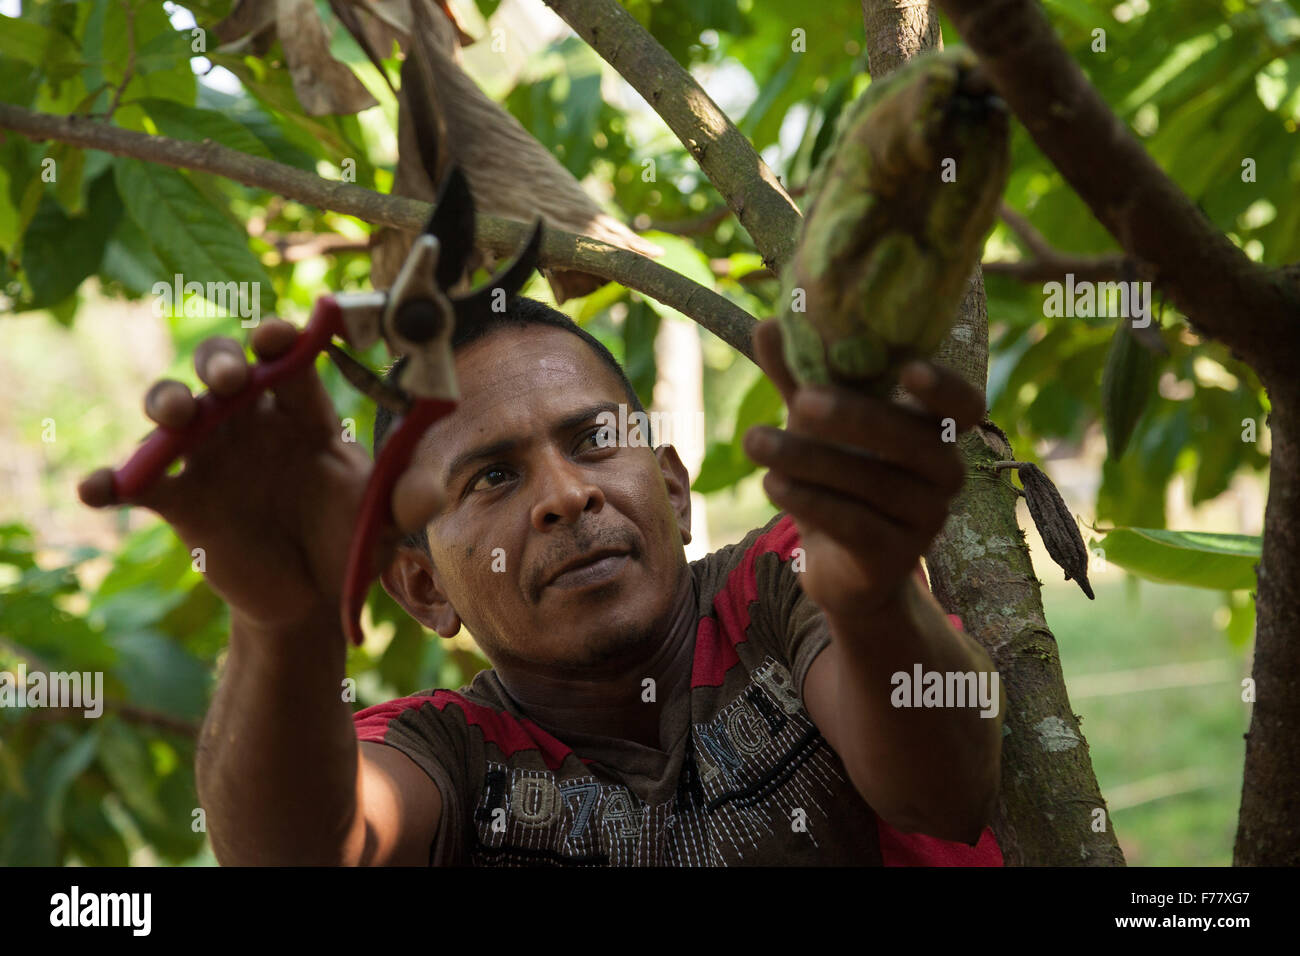 A farmer cuts ripe cocoa pods off a tree during harvest on his small farm February 23, 2015 in Isla de la Amargura, Careers, Colombia. Cocoa pods are dried and fermented becoming the basis of chocolate. Stock Photo